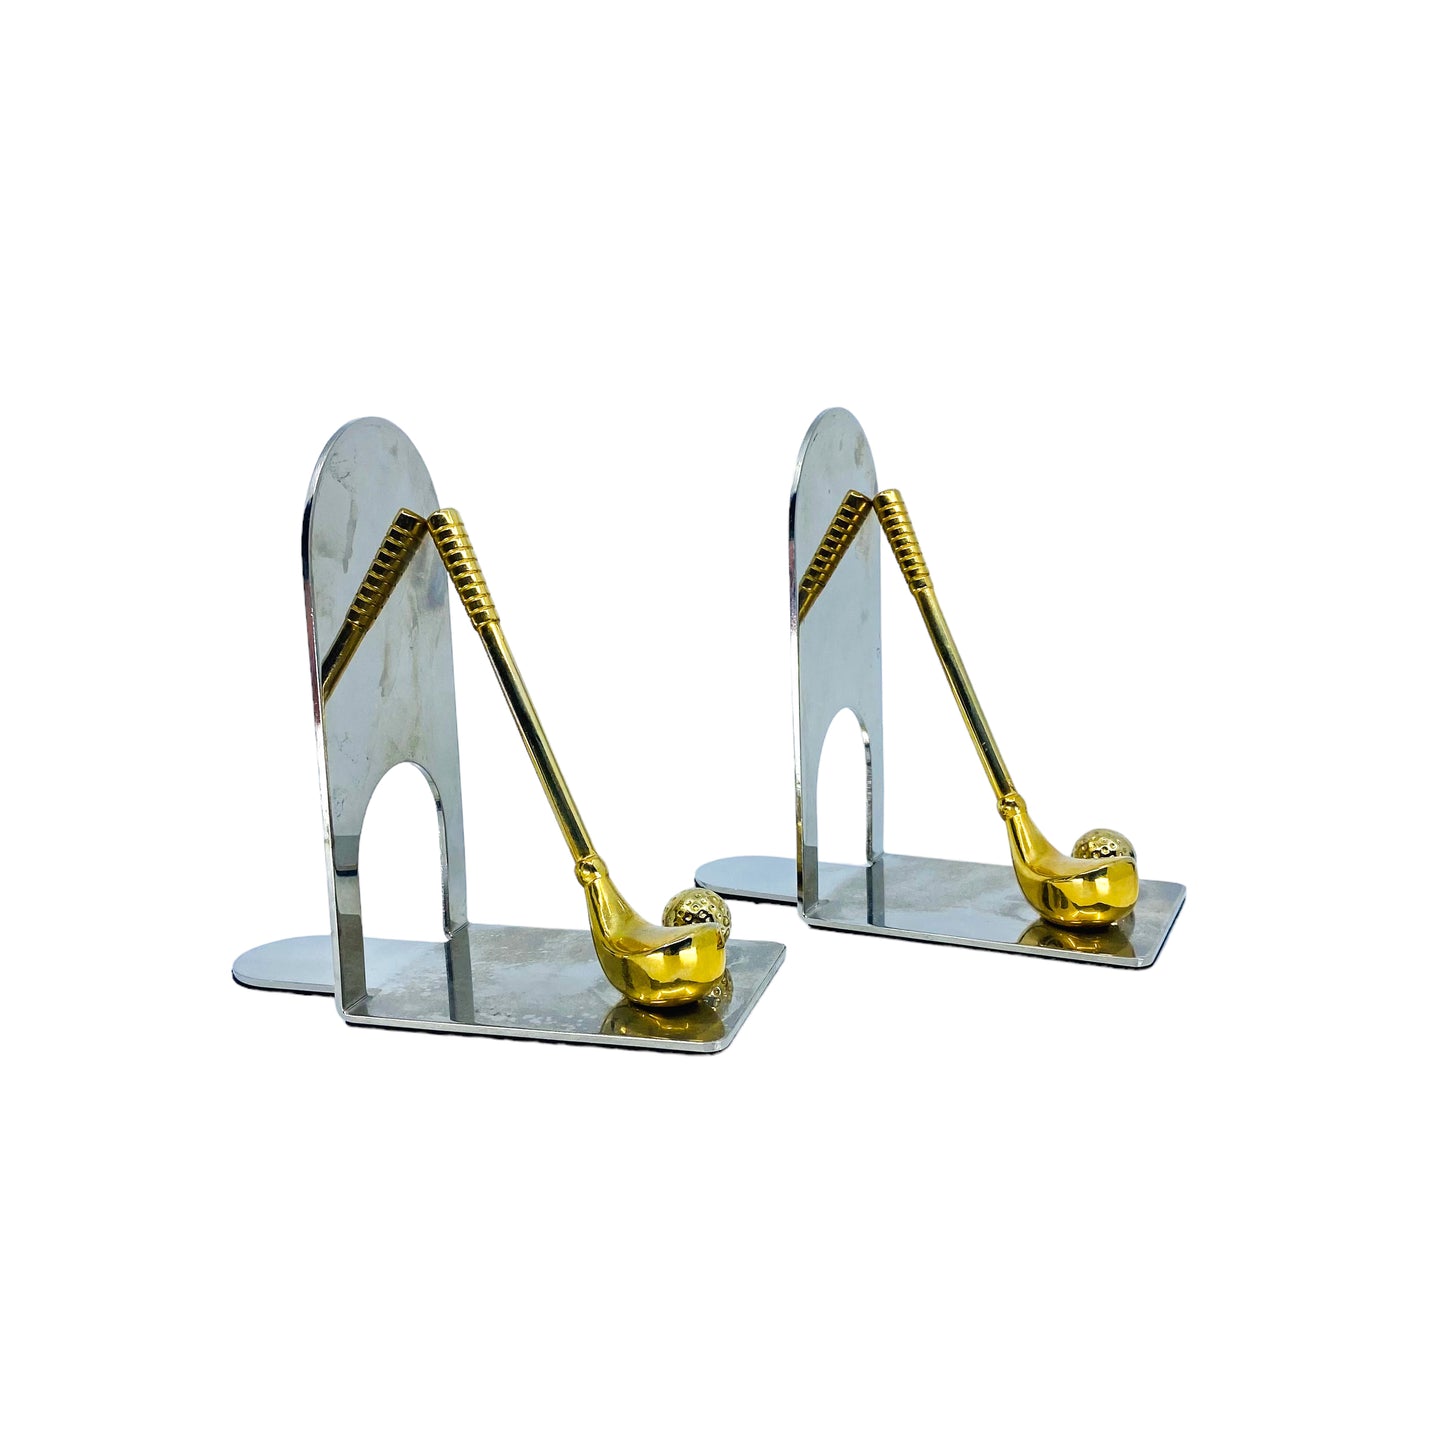 Vintage Chrome and Brass Golf Bookends